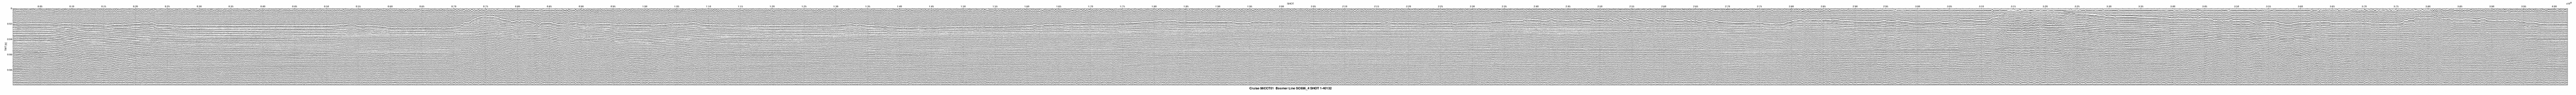 SC696_4 seismic profile thumbnail image with link to full size image